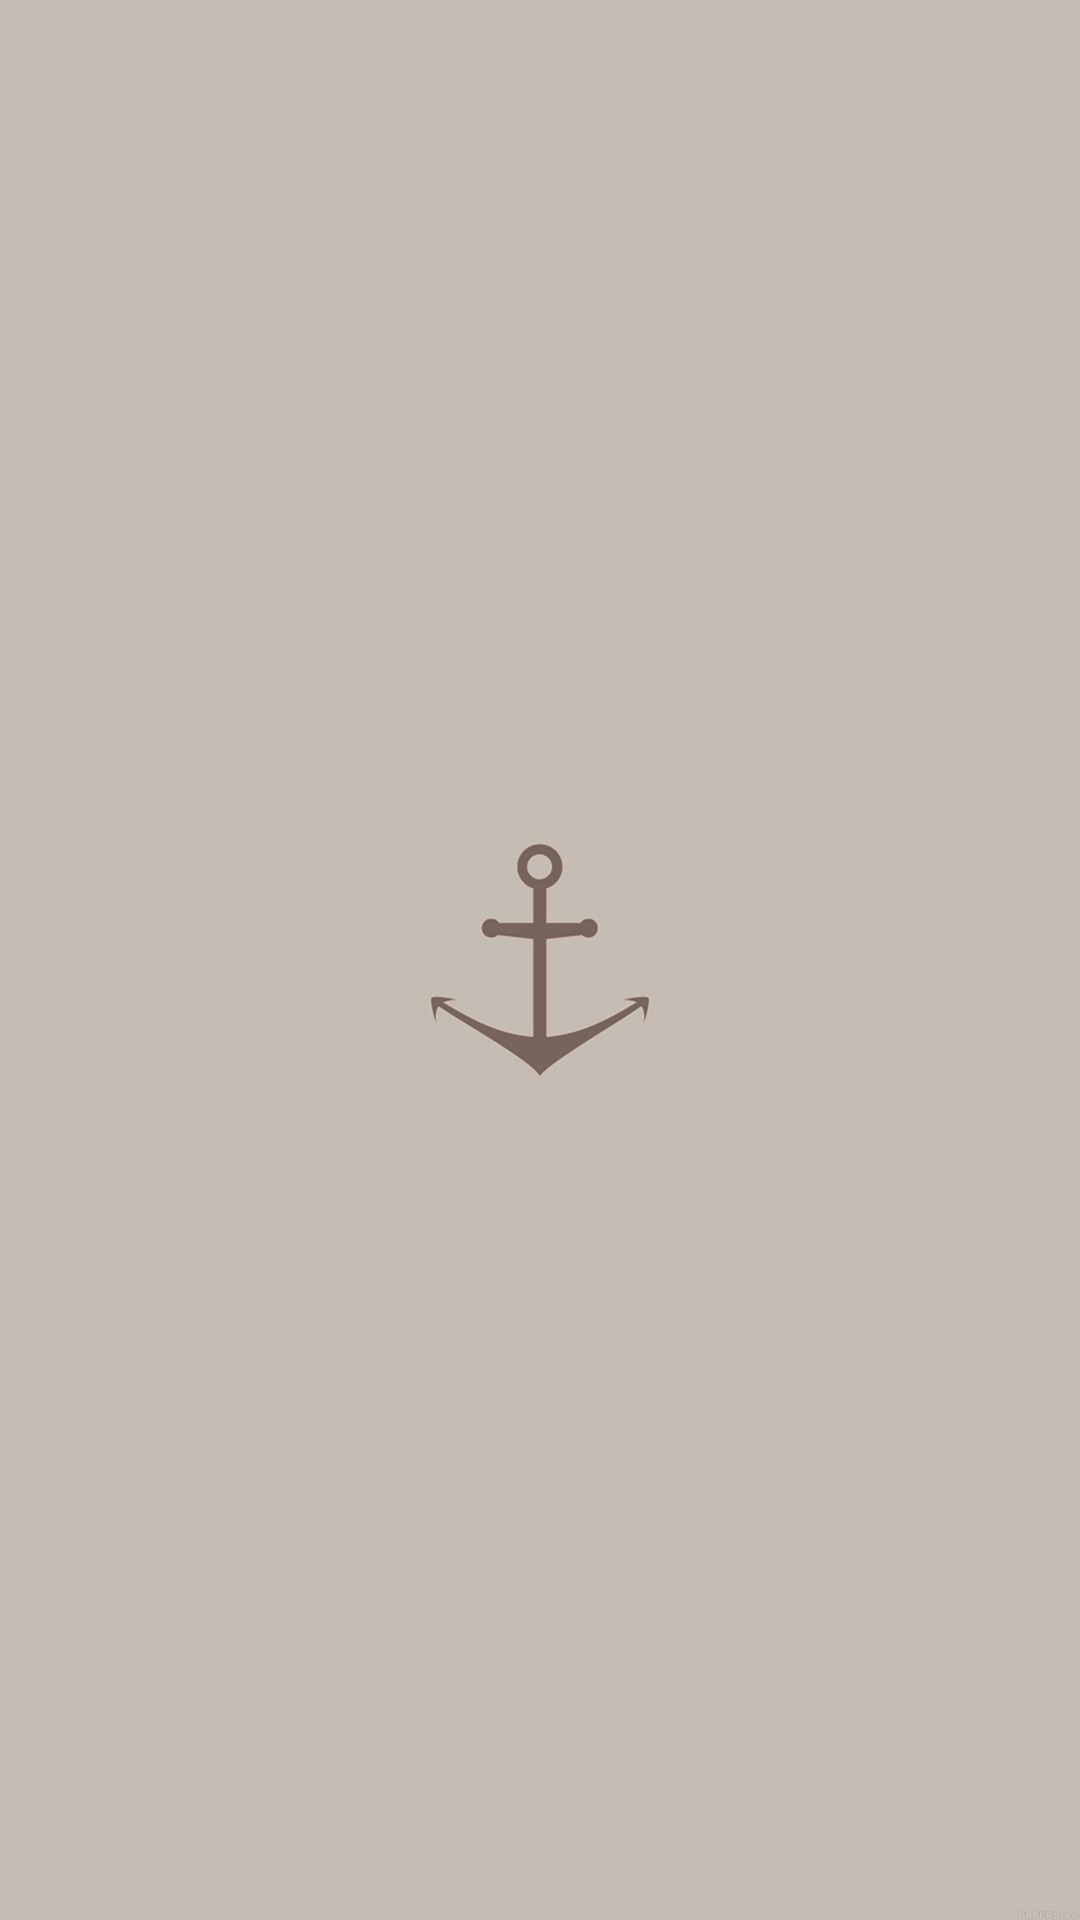 1080x1920 http://bit.ly/1ZmRmg1 - AndroidPapers.co wallpapers - ah29-minimal-sea- anchor-logo-red-art - Android, wallpaper | Android Wallpapers | Pinterest |  Anchor ...